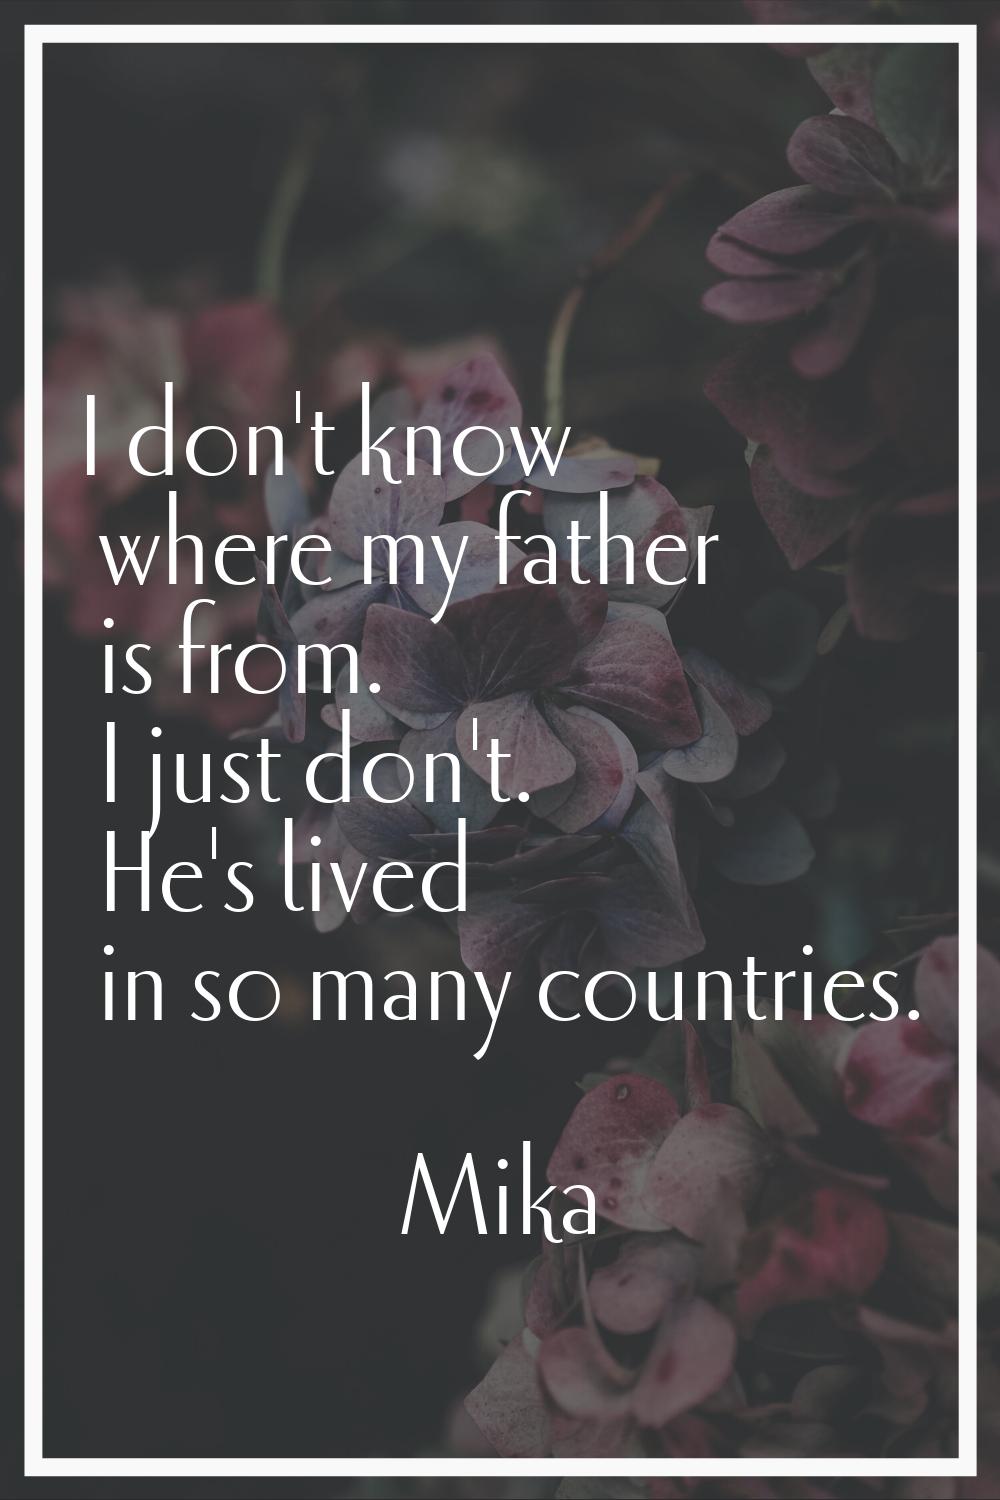 I don't know where my father is from. I just don't. He's lived in so many countries.